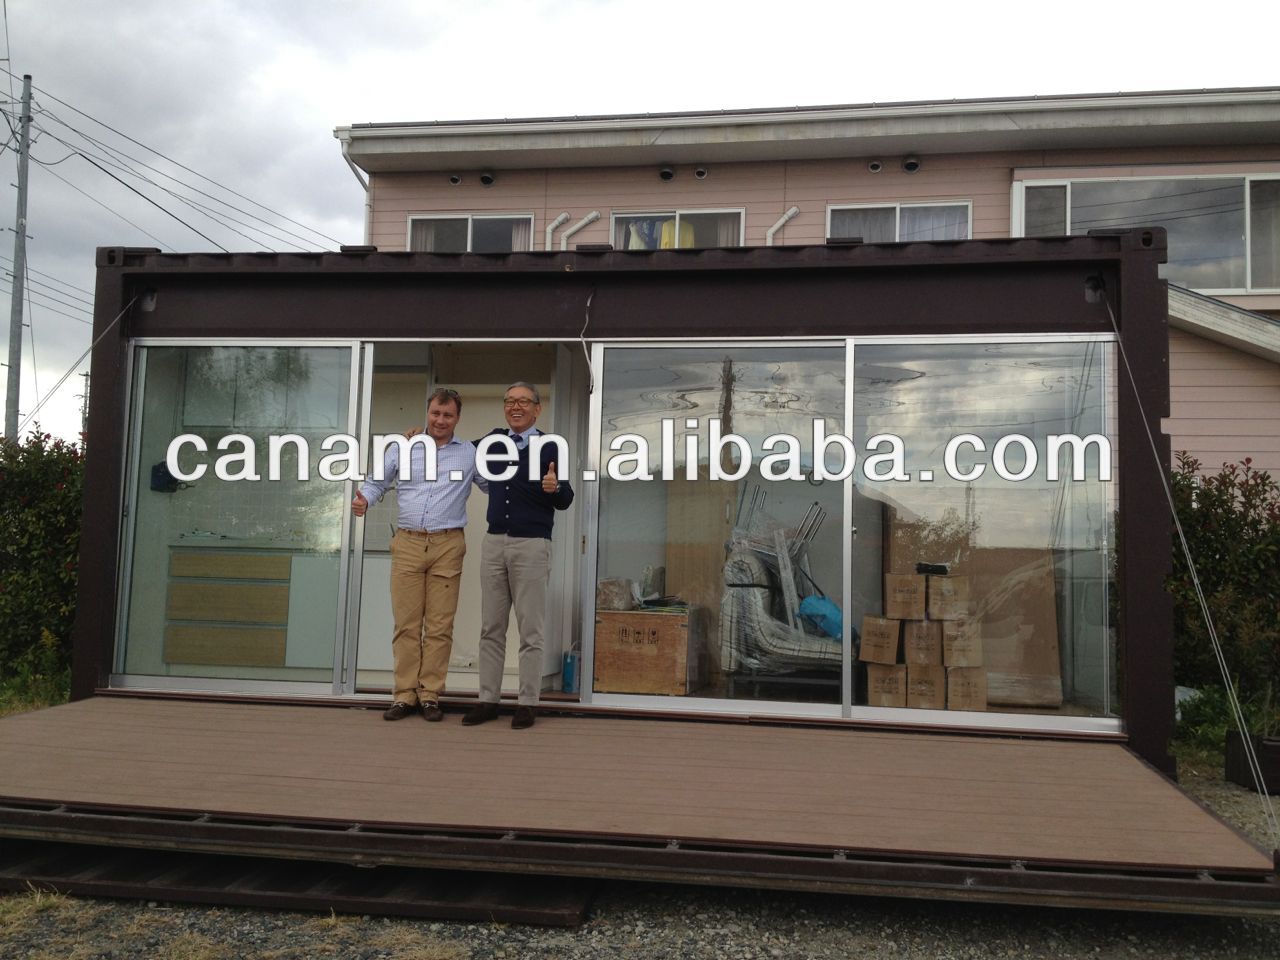 prefab prefabricated container home